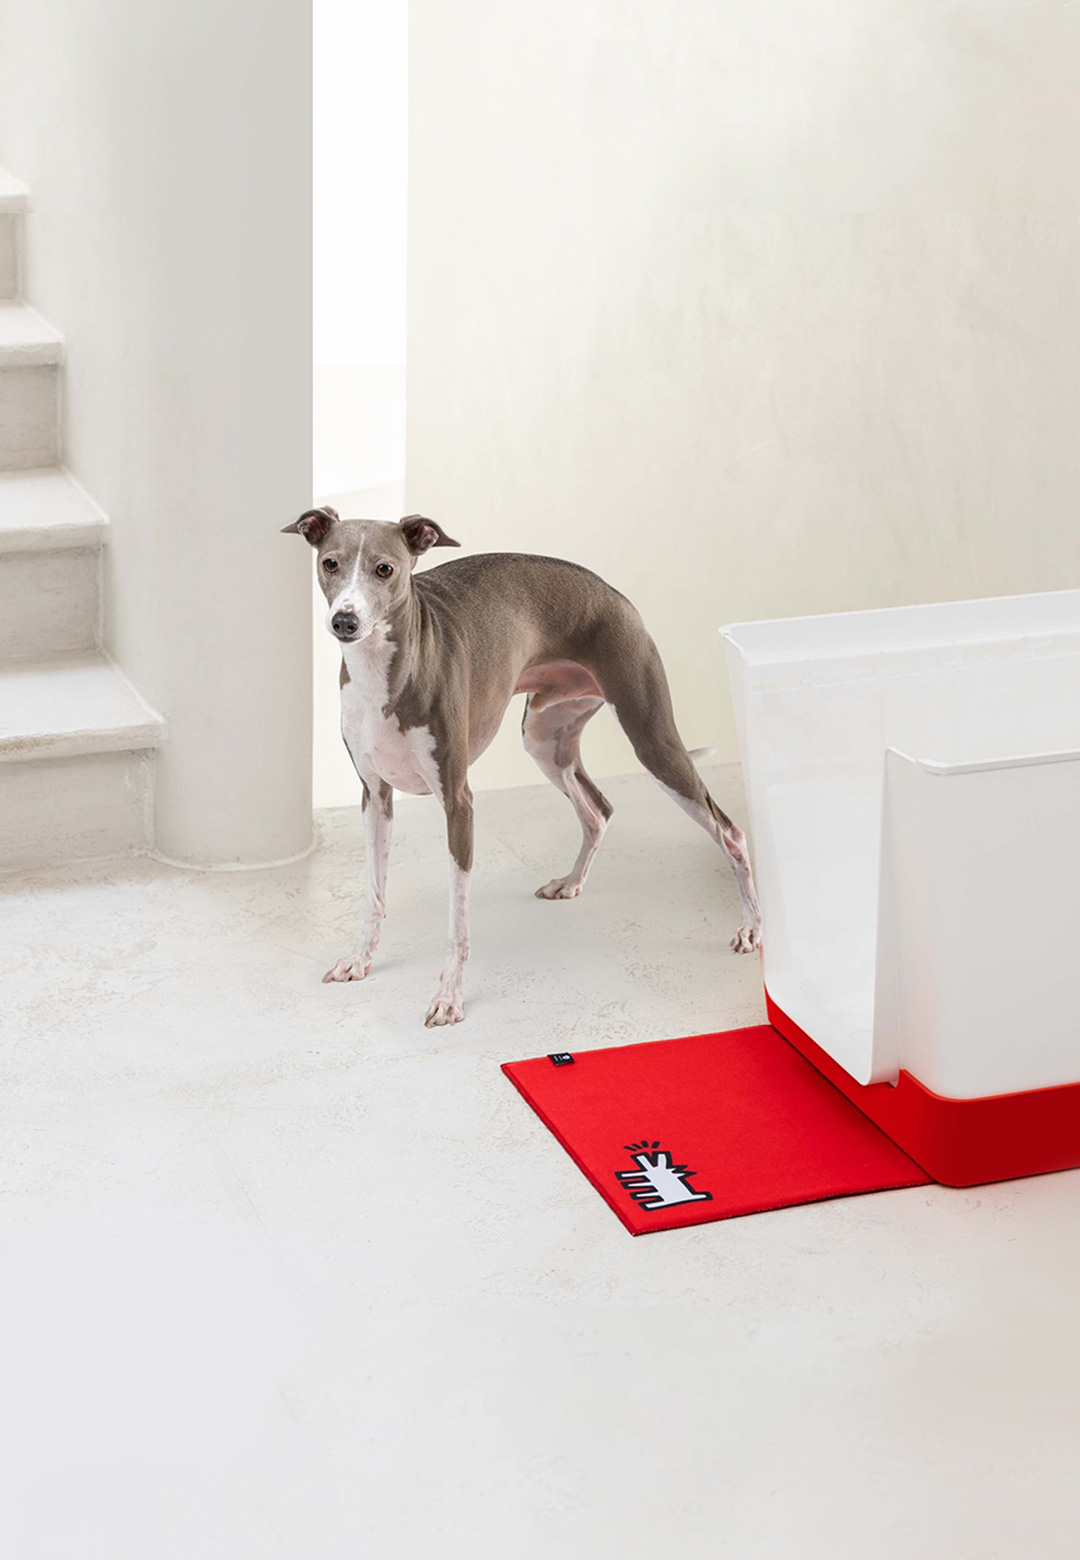 Alain Courchesne explores product design for pets blending playfulness and practicality